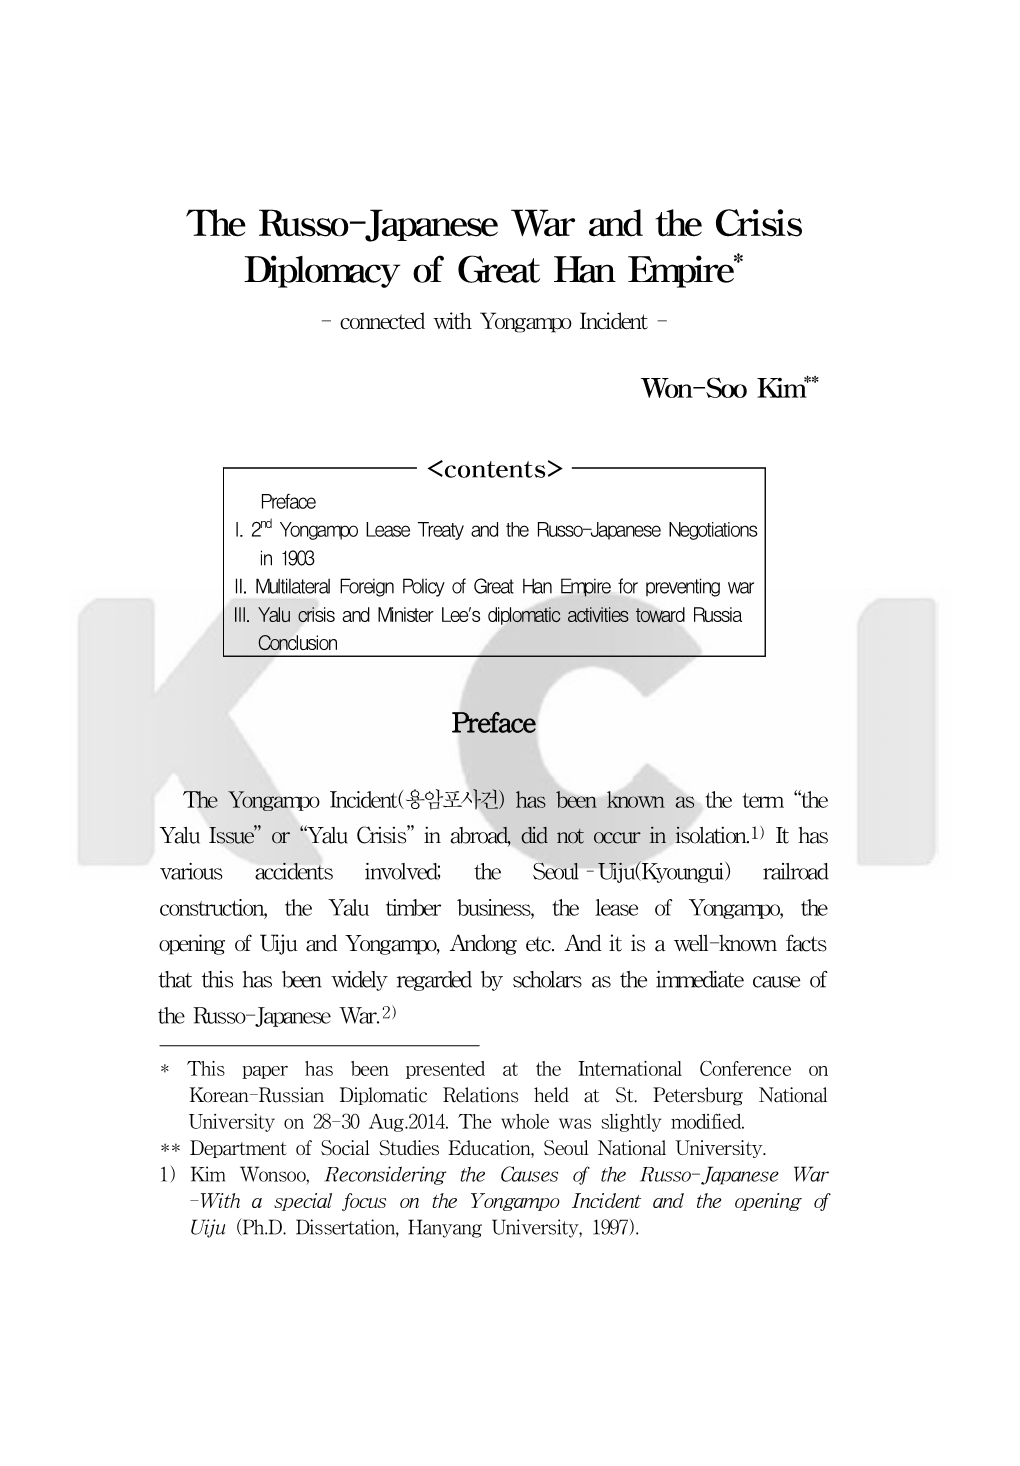 The Russo-Japanese War and the Crisis Diplomacy of Great Han Empire* - Connected with Yongampo Incident